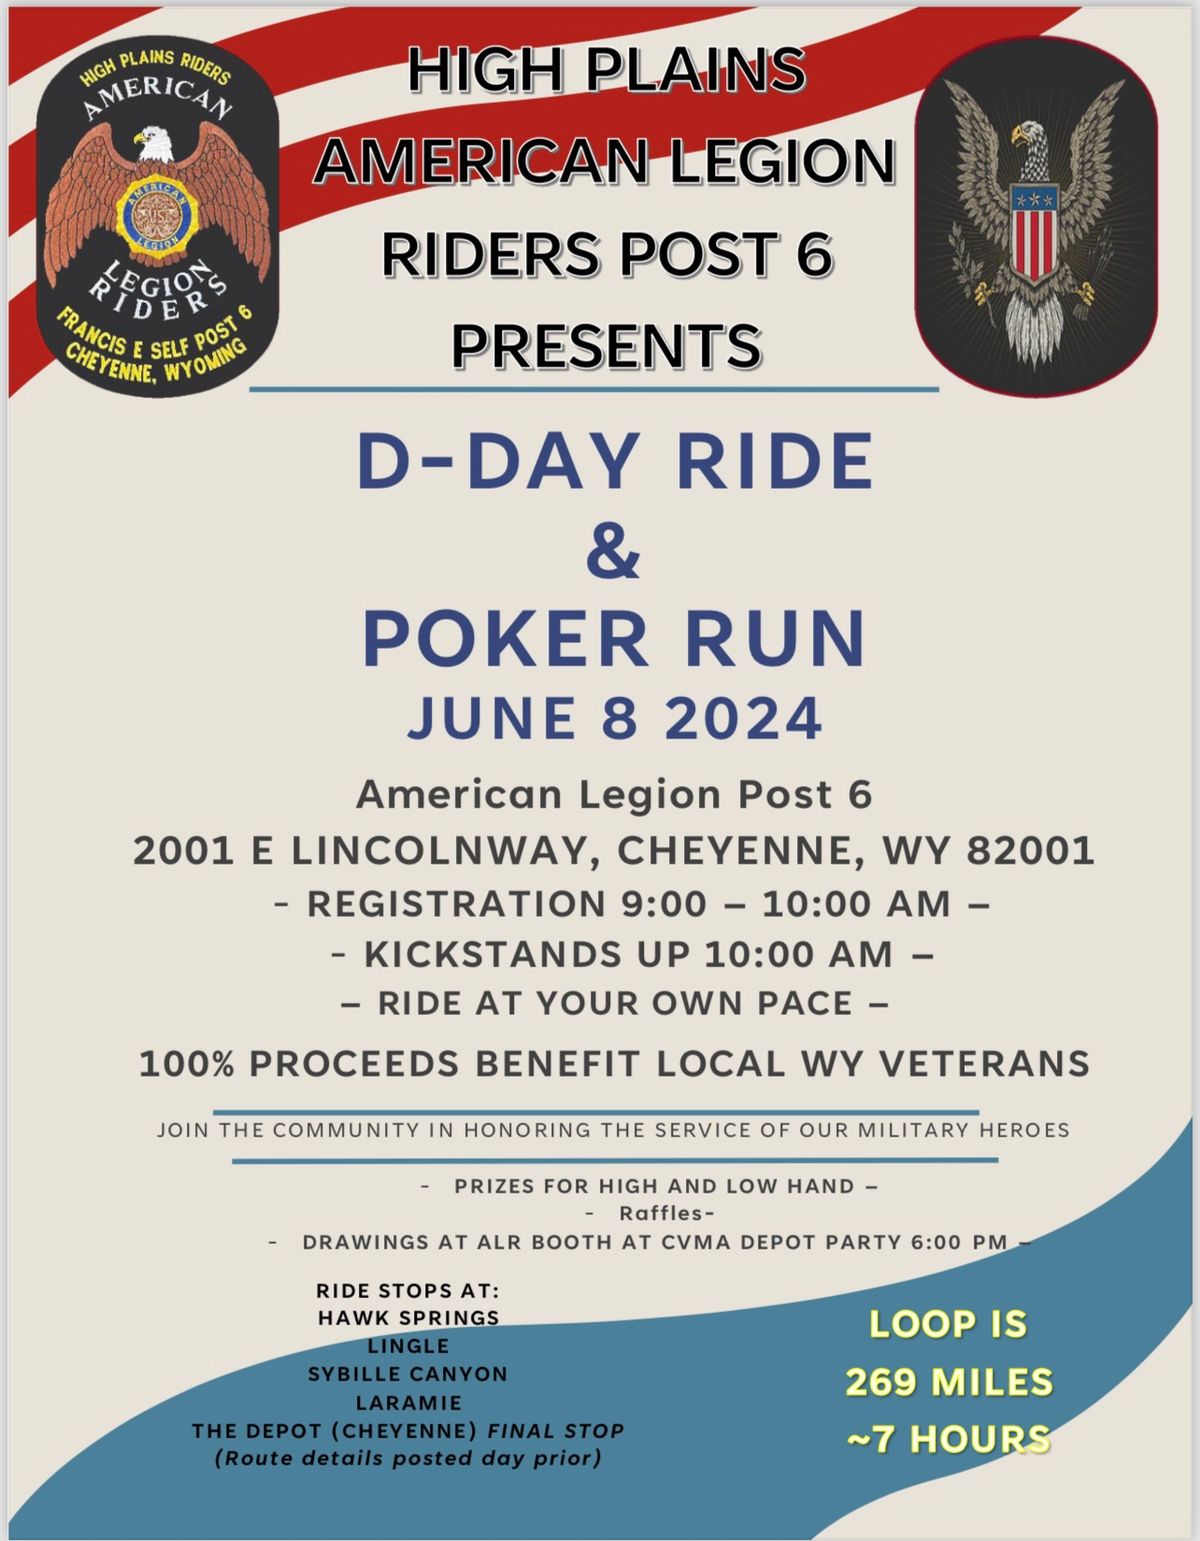 D-DAY RIDE AND POKER RUN